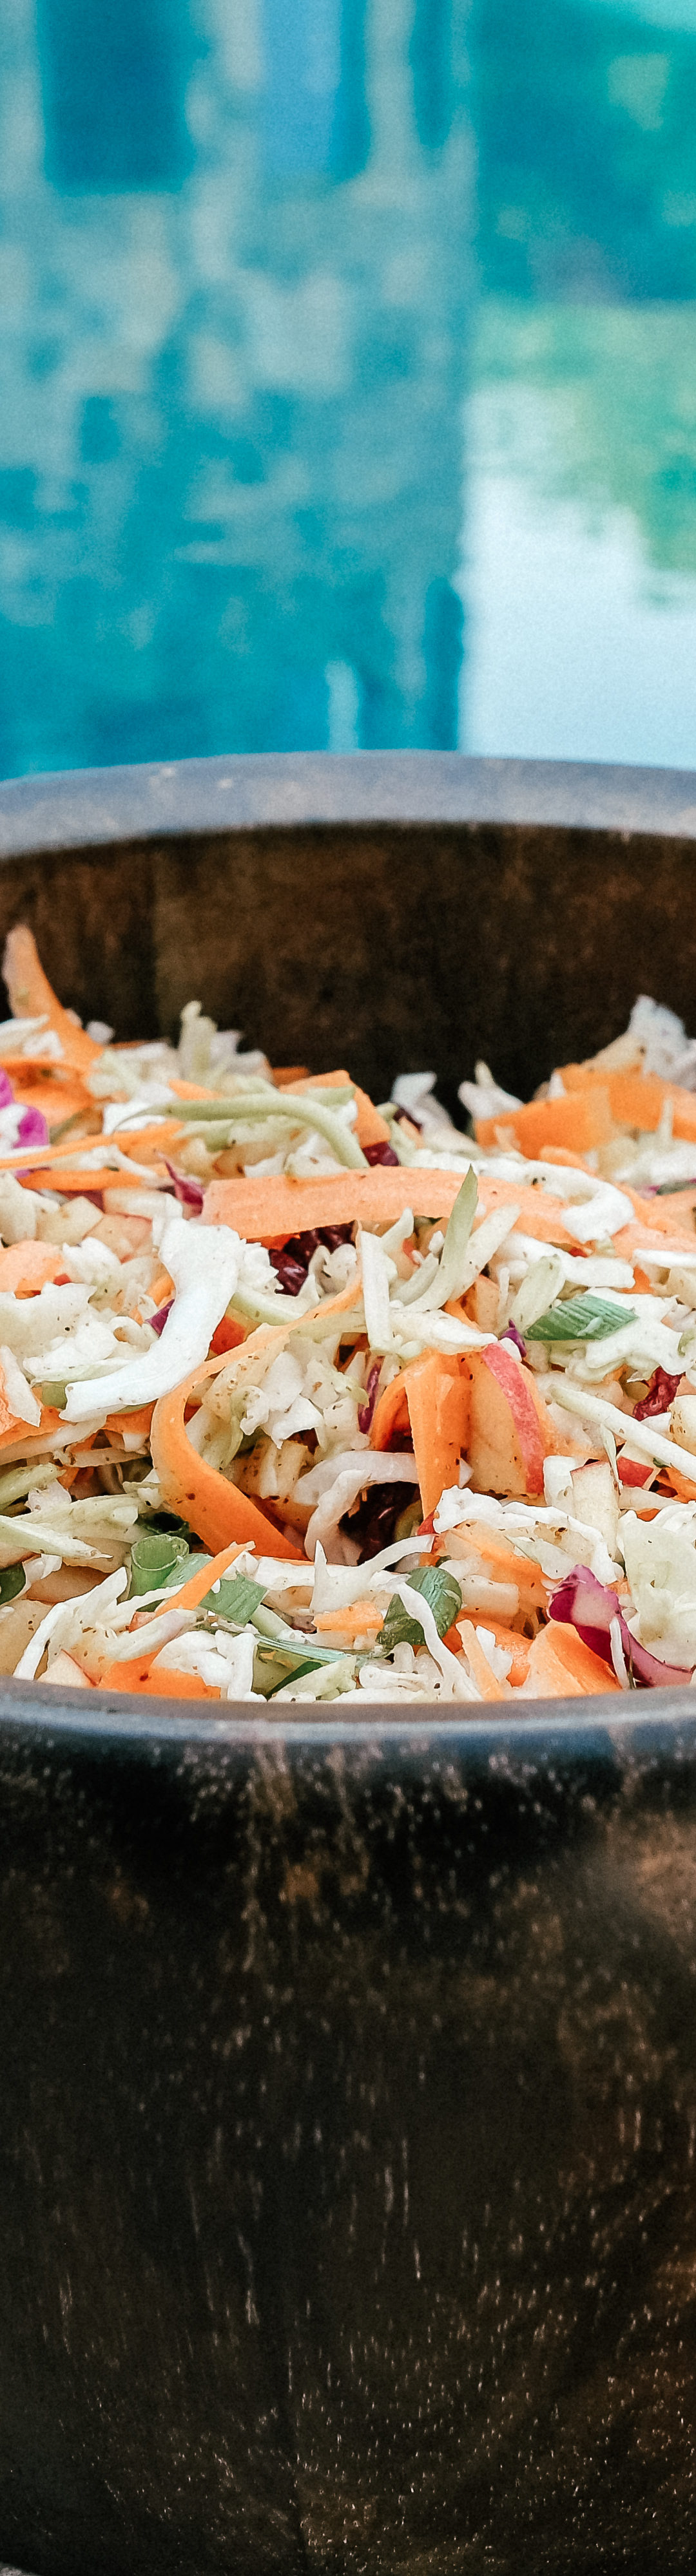 Healthy, Dairy Free Coleslaw for your Memorial Day Cookout